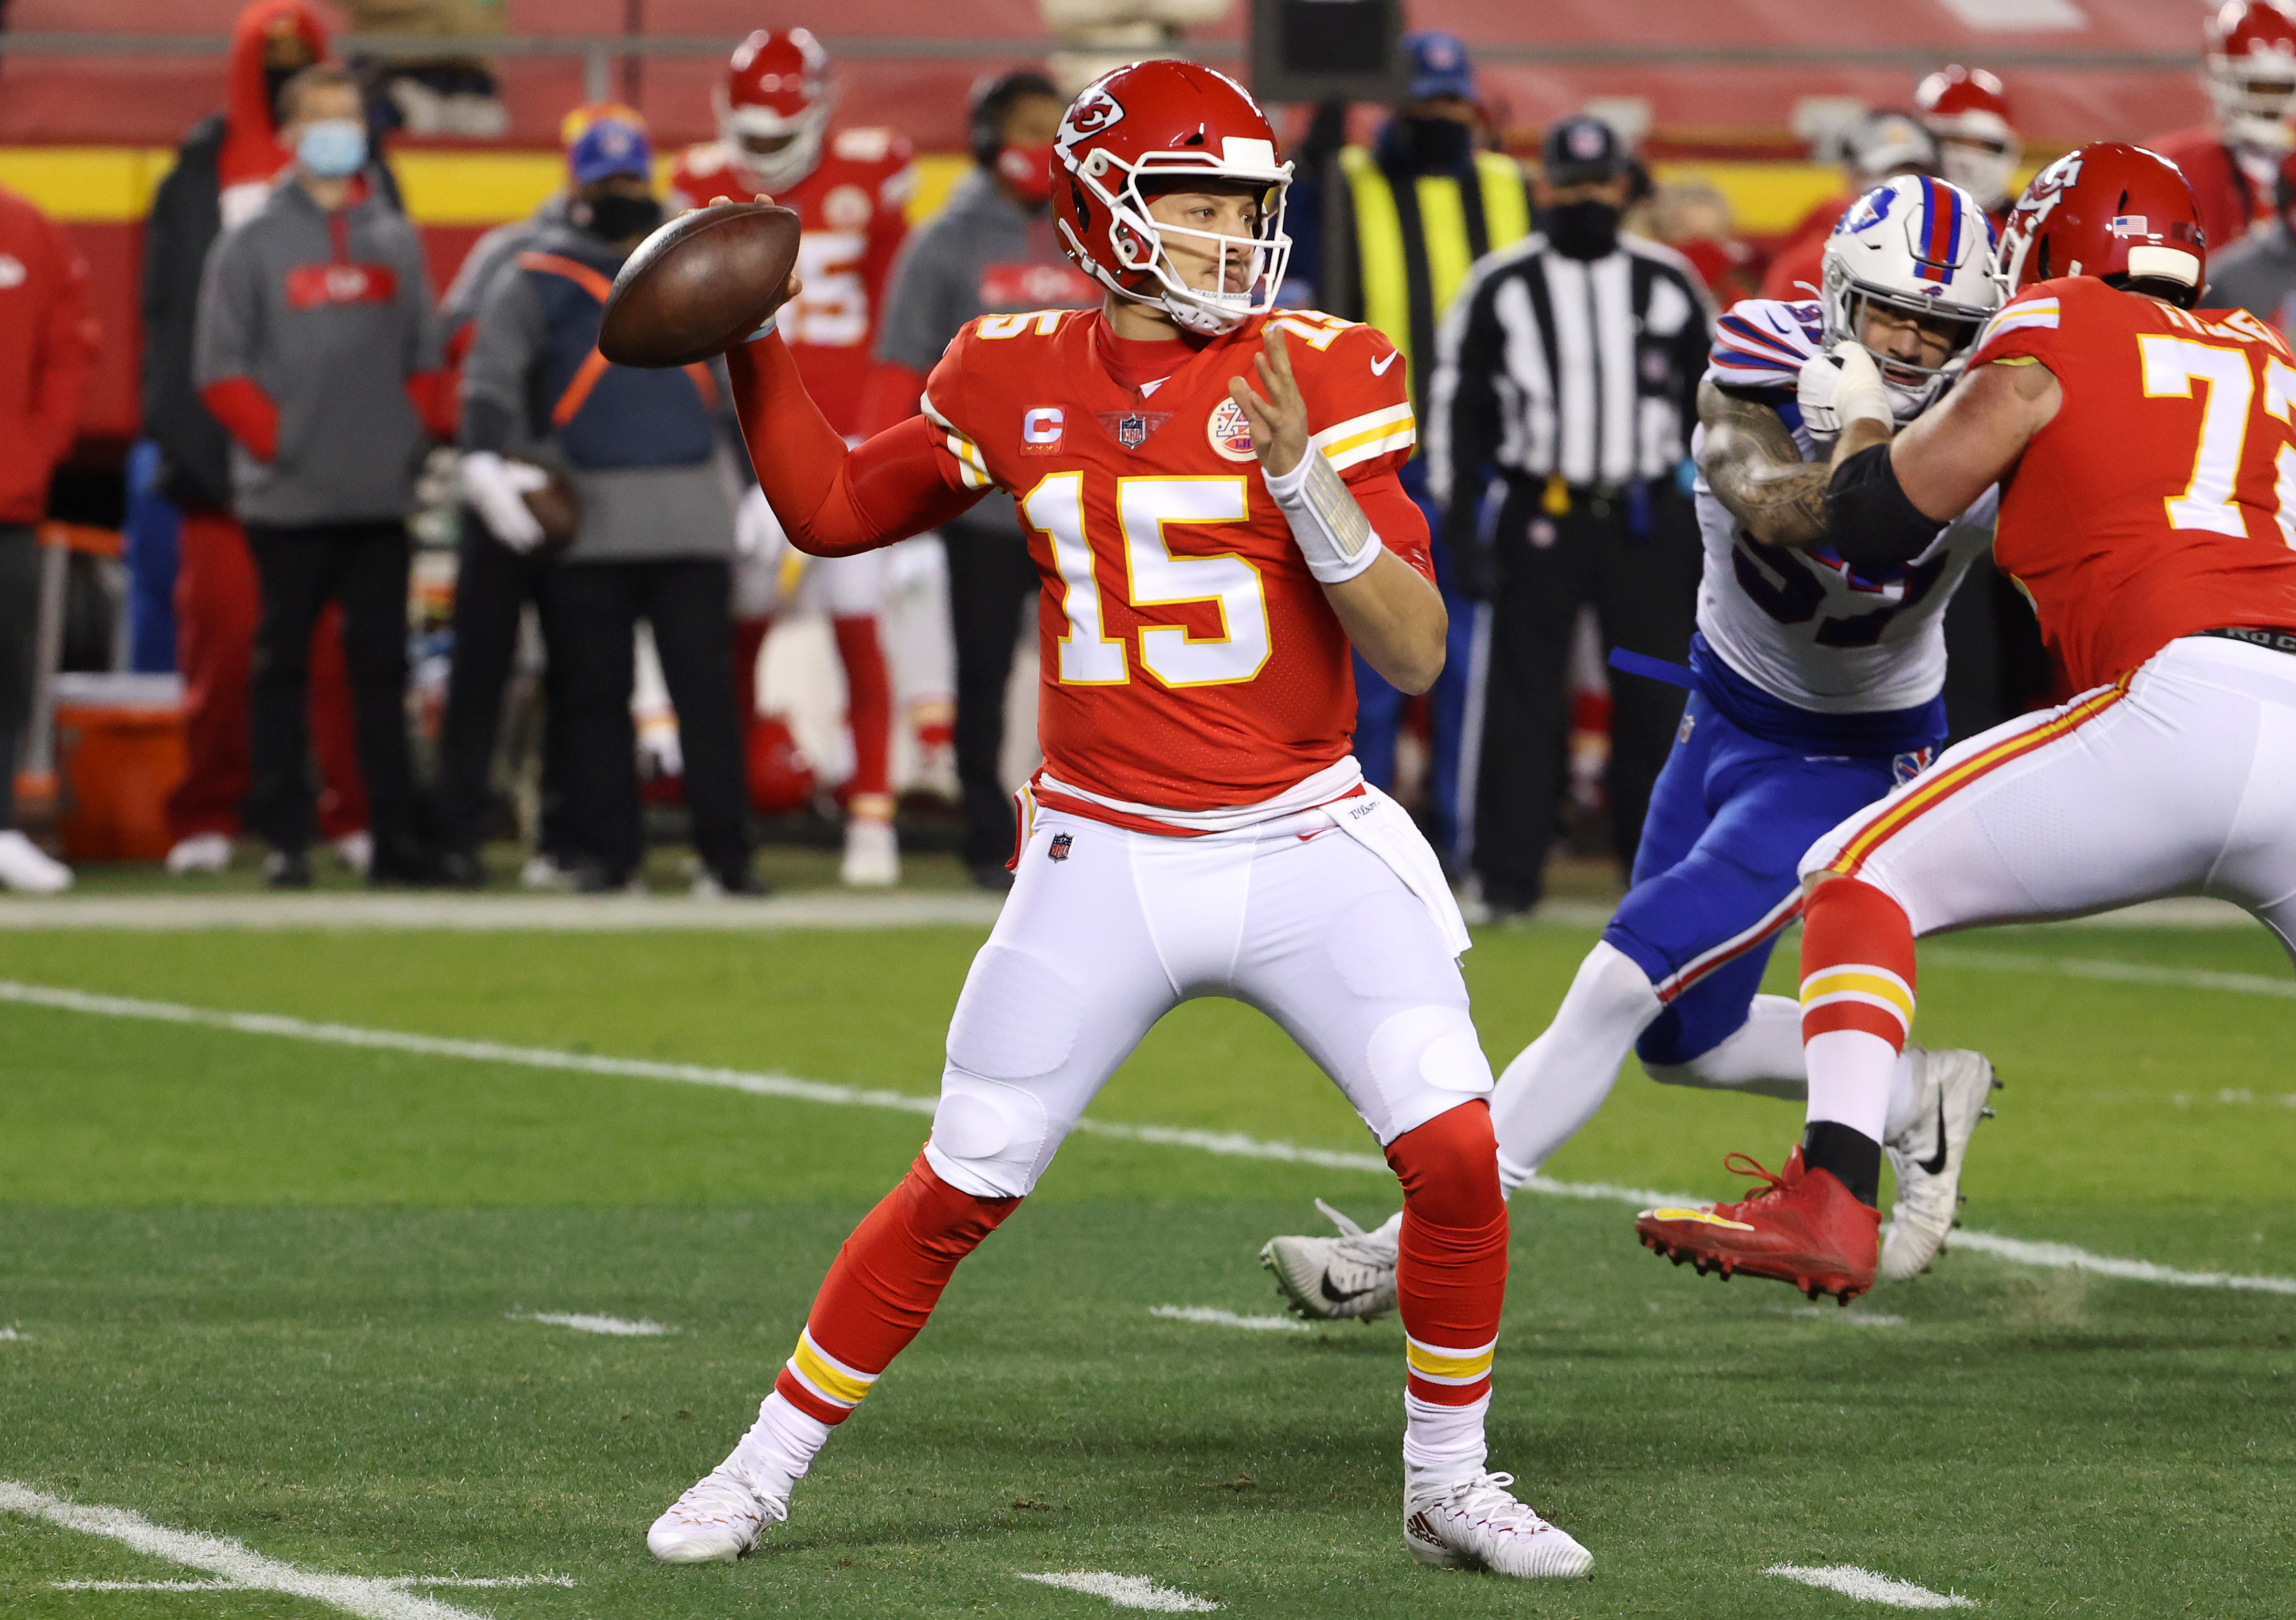 Patrick Mahomes #15 of the Kansas City Chiefs throws a pass in the first half against the Buffalo Bills during the AFC Championship game at Arrowhead Stadium on January 24, 2021 in Kansas City, Missouri.